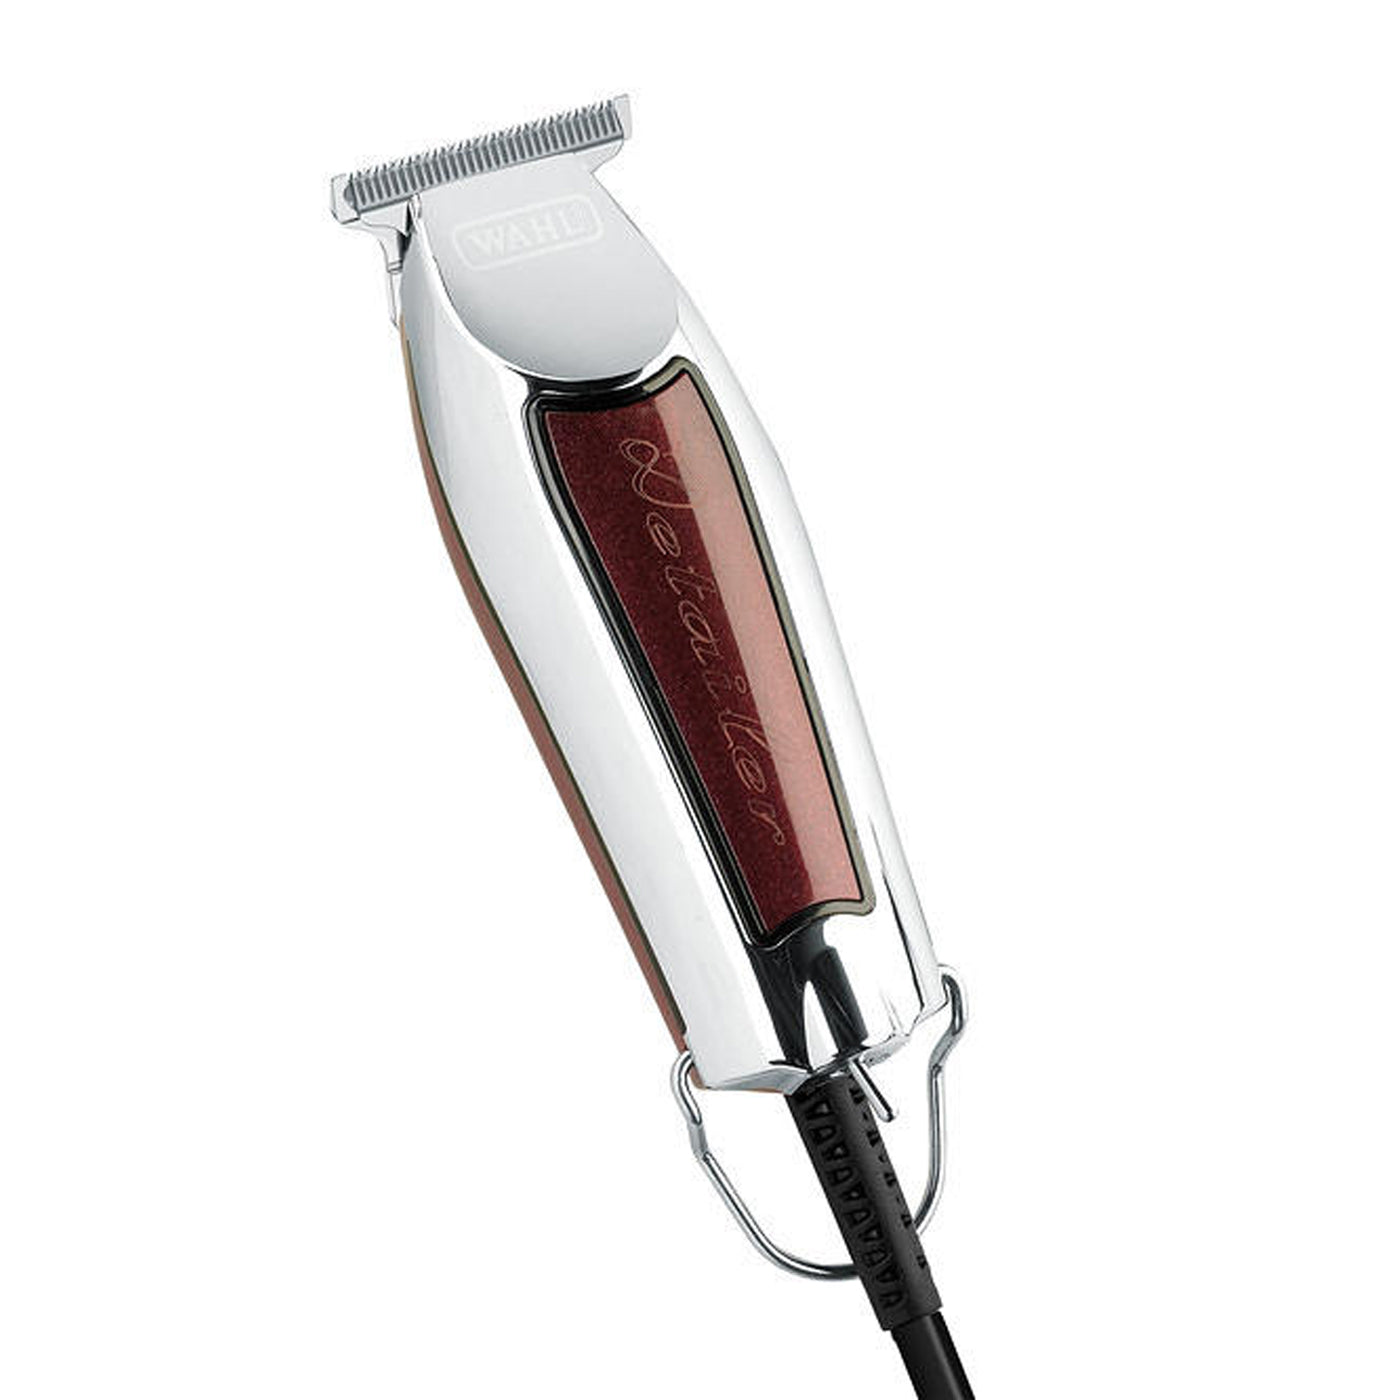 Wahl Detailer Trimmer with Extra Wide Blade - Ultimate Hair and Beauty